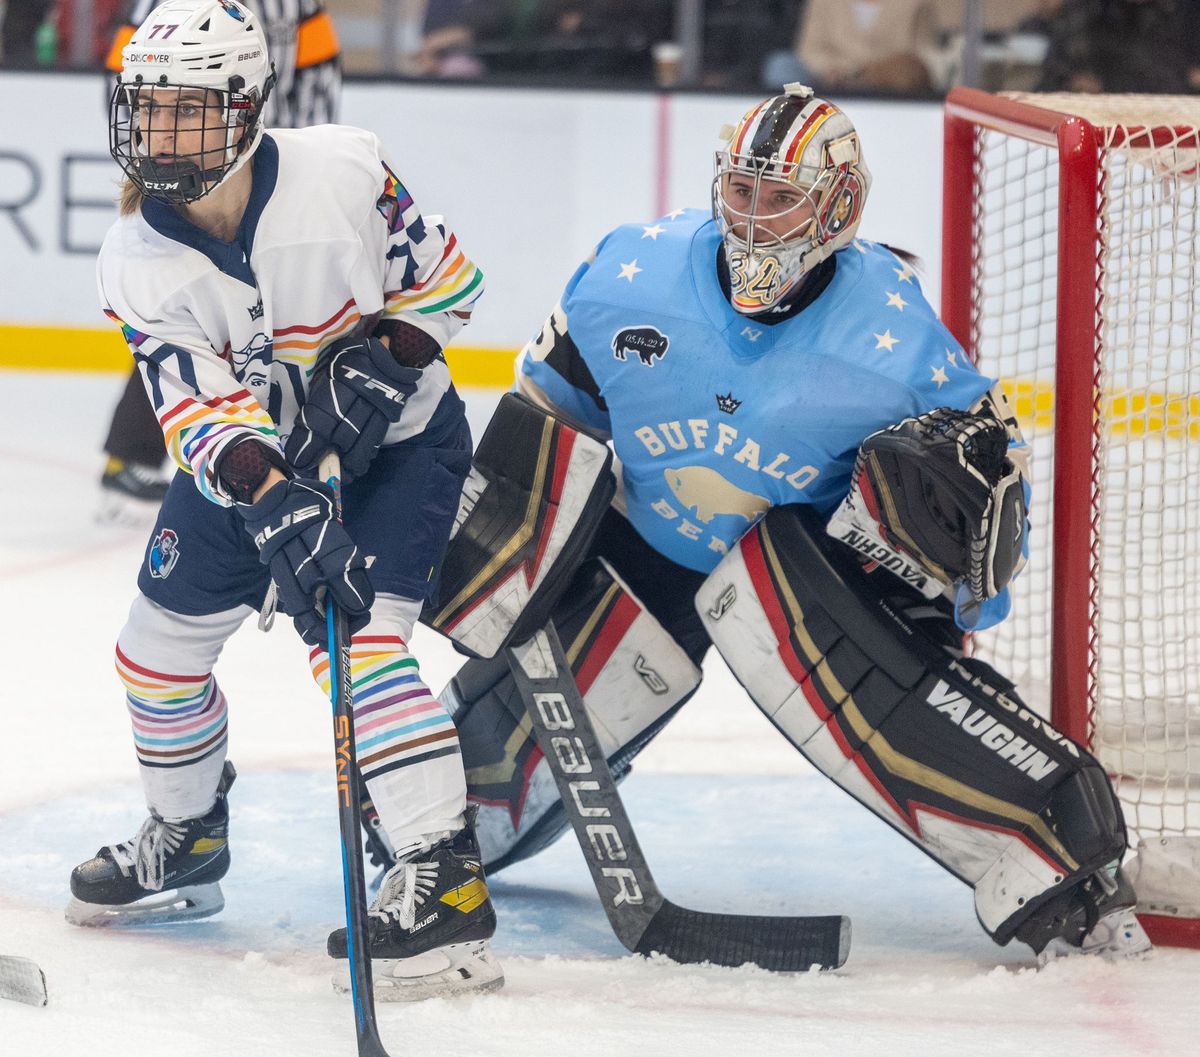 Ex-Beauts Harley, Ganser Thrived with Riveters This Season